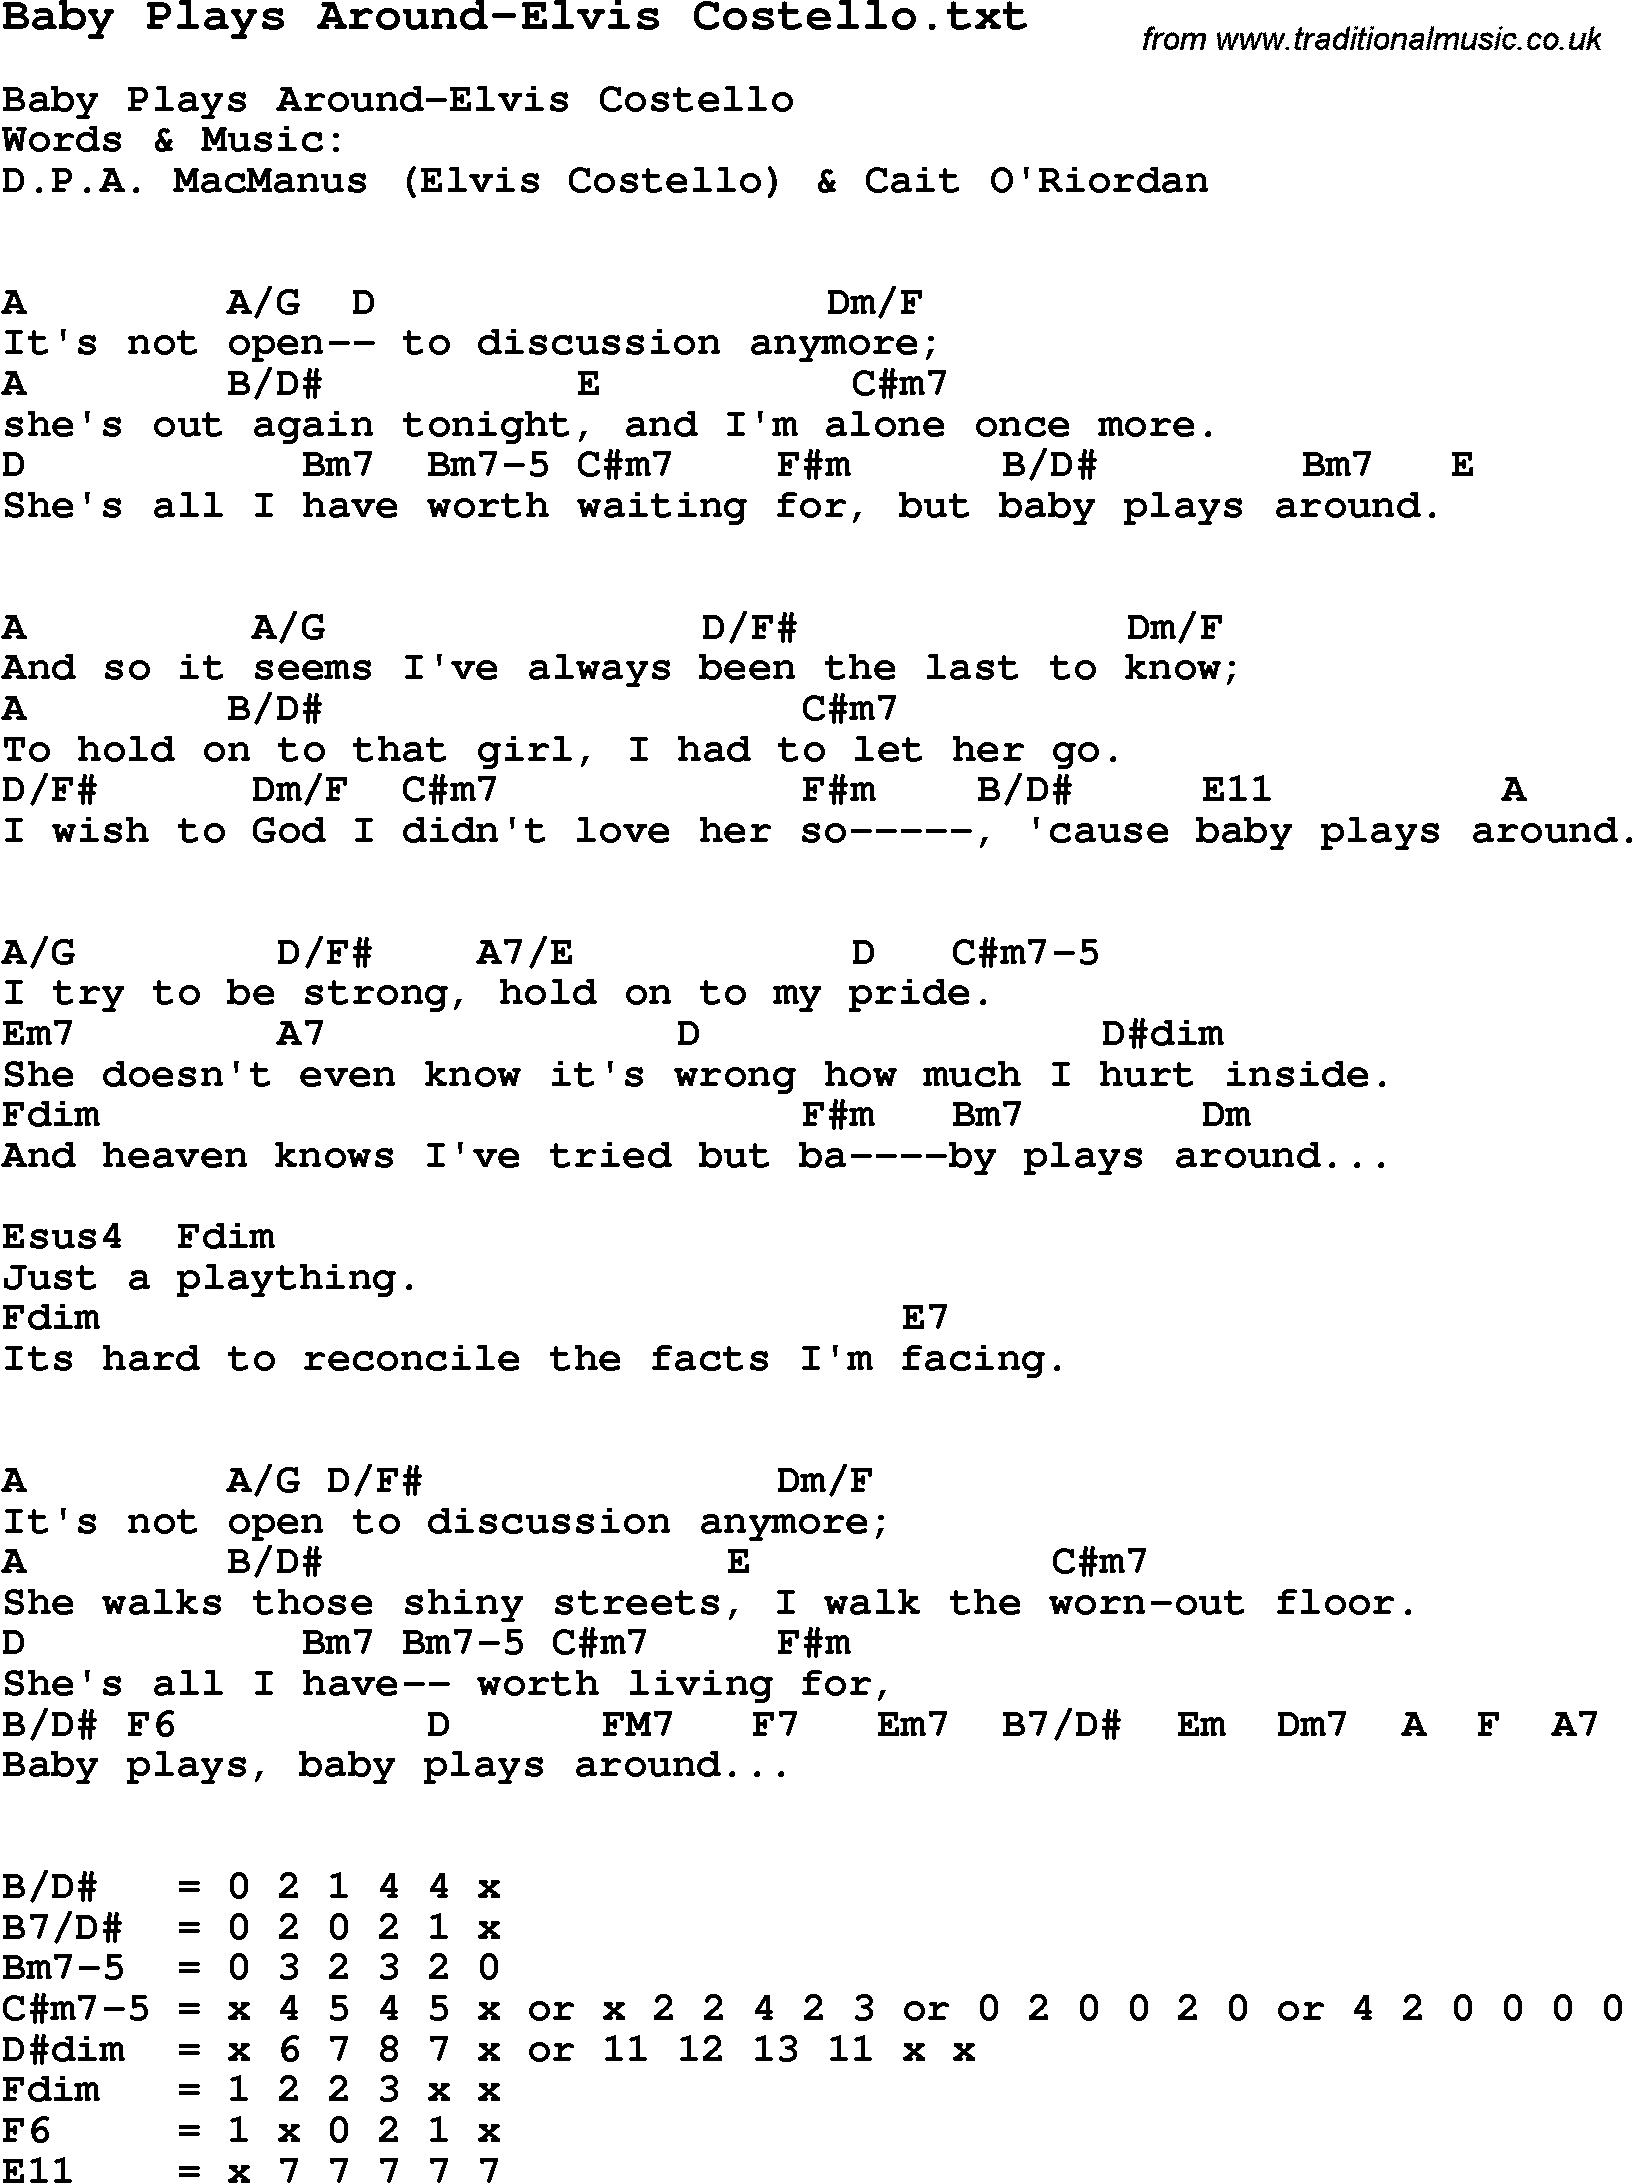 From The Inside Out Chords Jazz Song Ba Plays Around Elvis Costello With Chords Tabs And